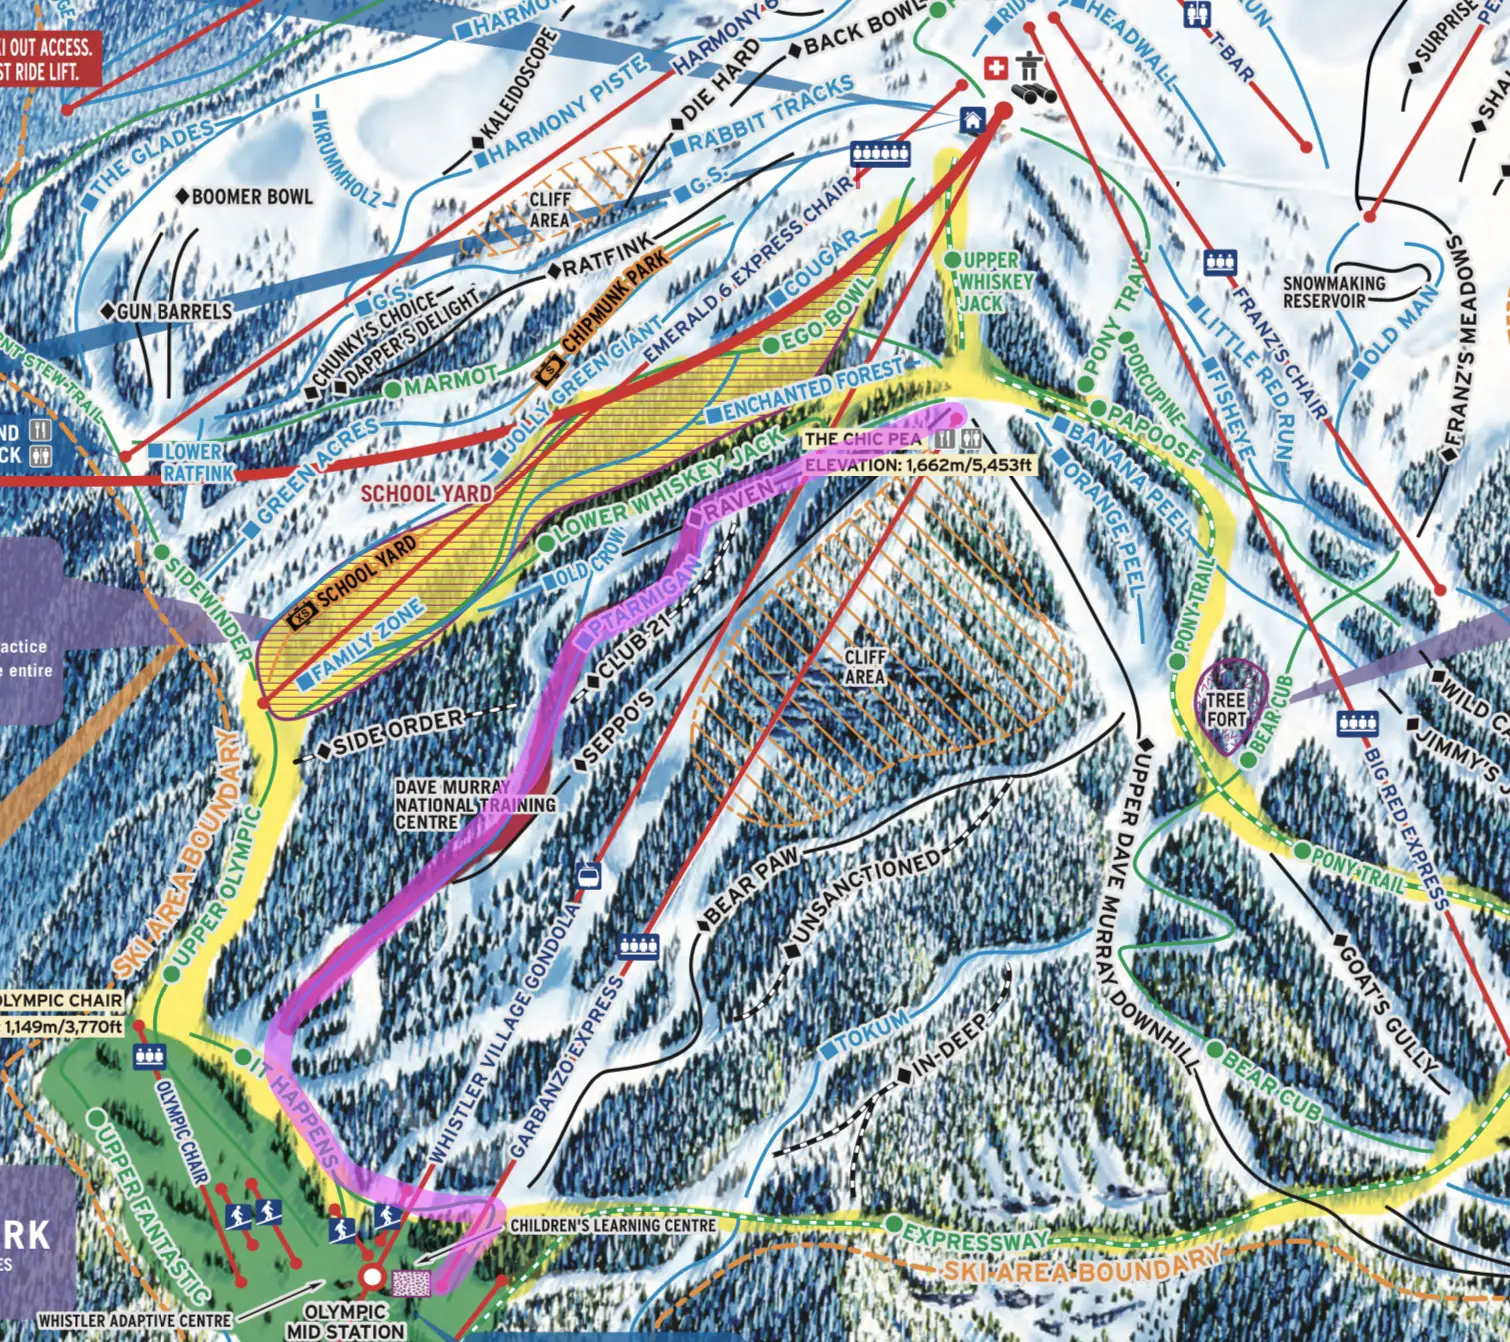 Map of Ptarmigan, Dave Murray National Training Centre, Garbonzo Chair, Whistler BC 